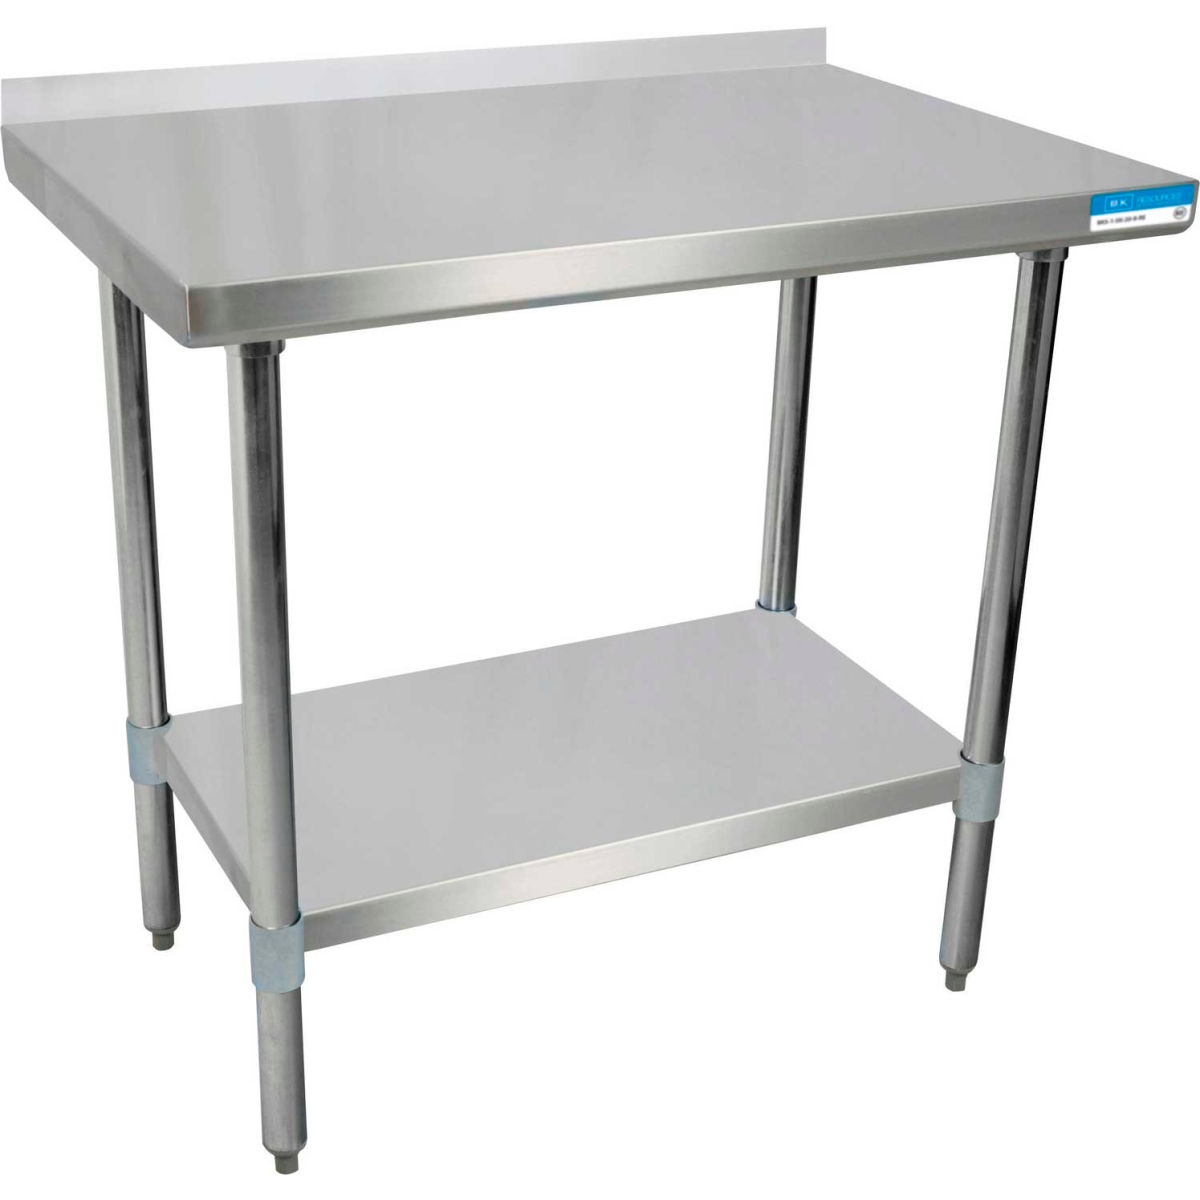 Picture of BK Resources B0899572 18 Gauge 430 Series Stainless Workbench with Undershelf & 1.5 in. Backsplash - 24 x 24 in.